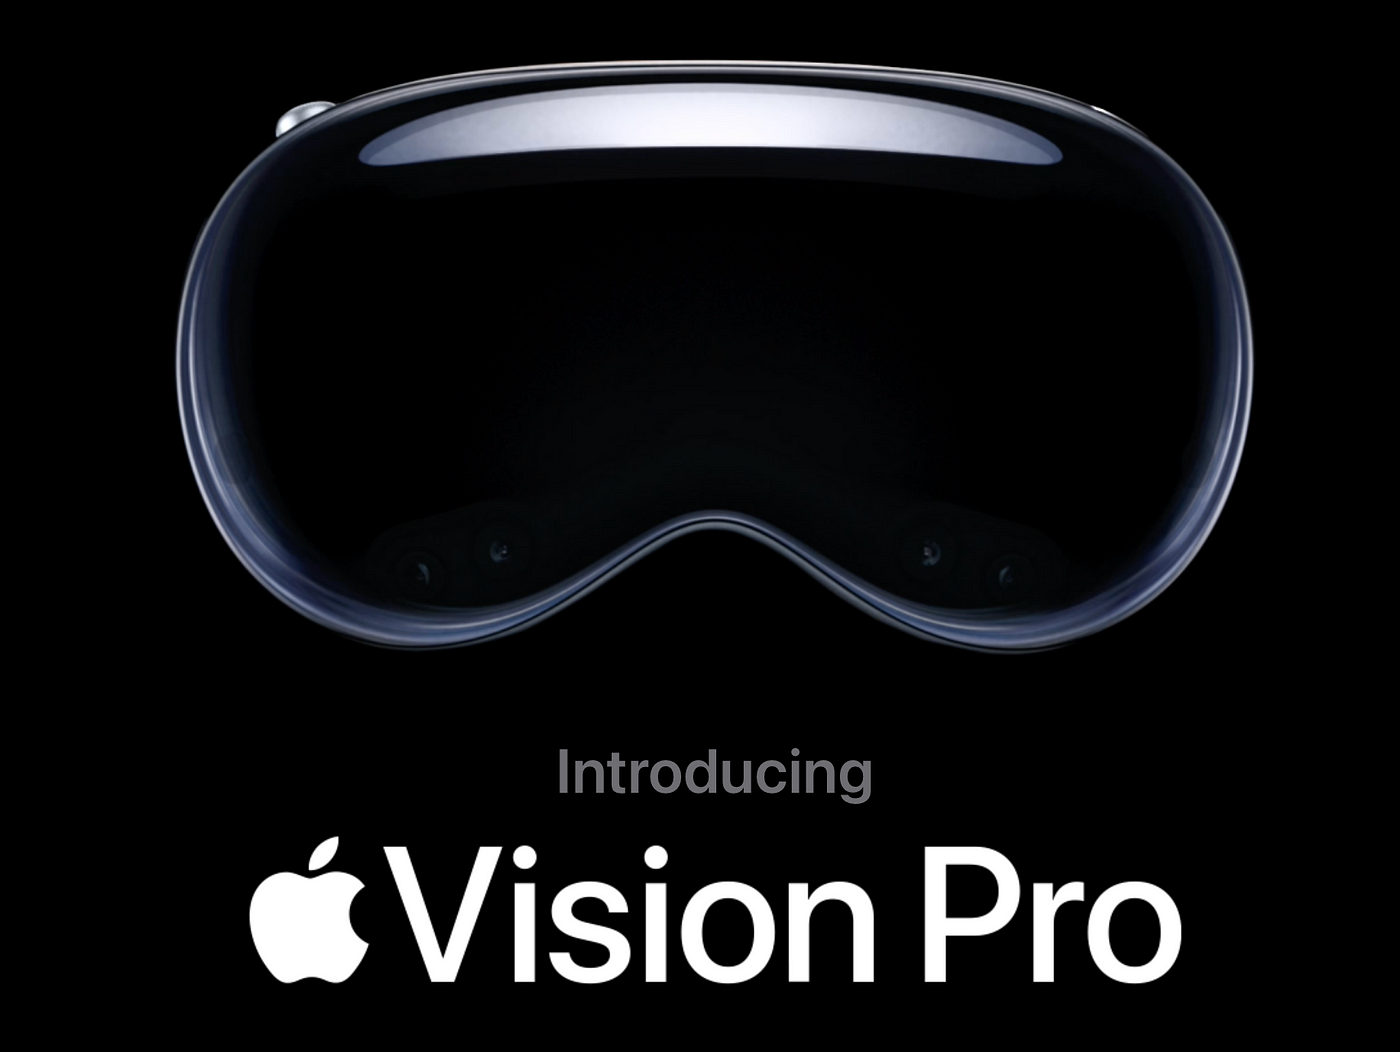  Vision Pro: It's not for you and Why it's the next iPhone. | by Aravind |  Medium